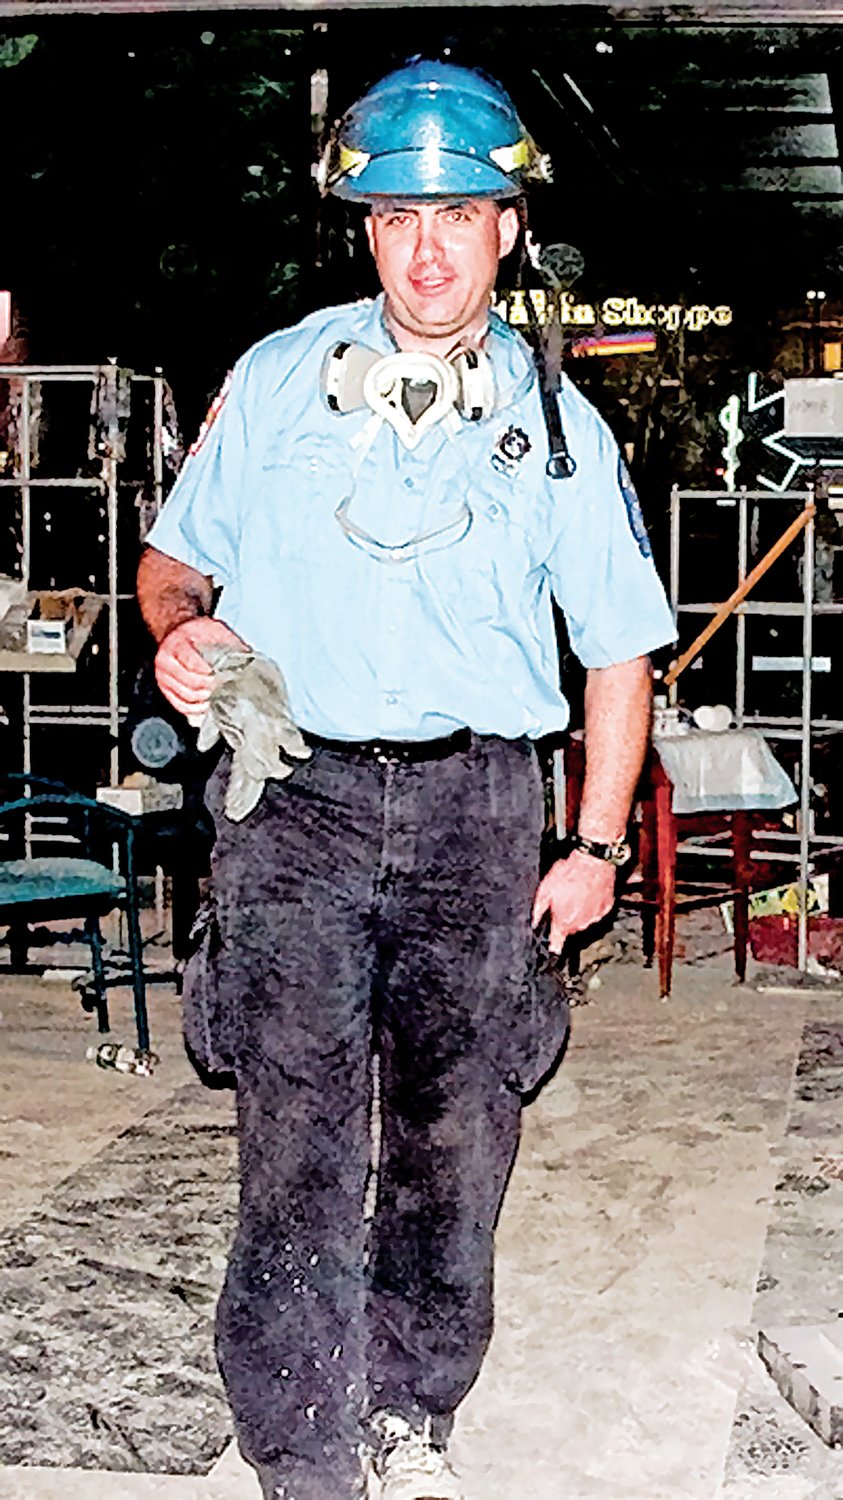 Kevin Kelly died of a severe respiratory illness attributed to his work at the World Trade Center site after the 9/11 attacks.